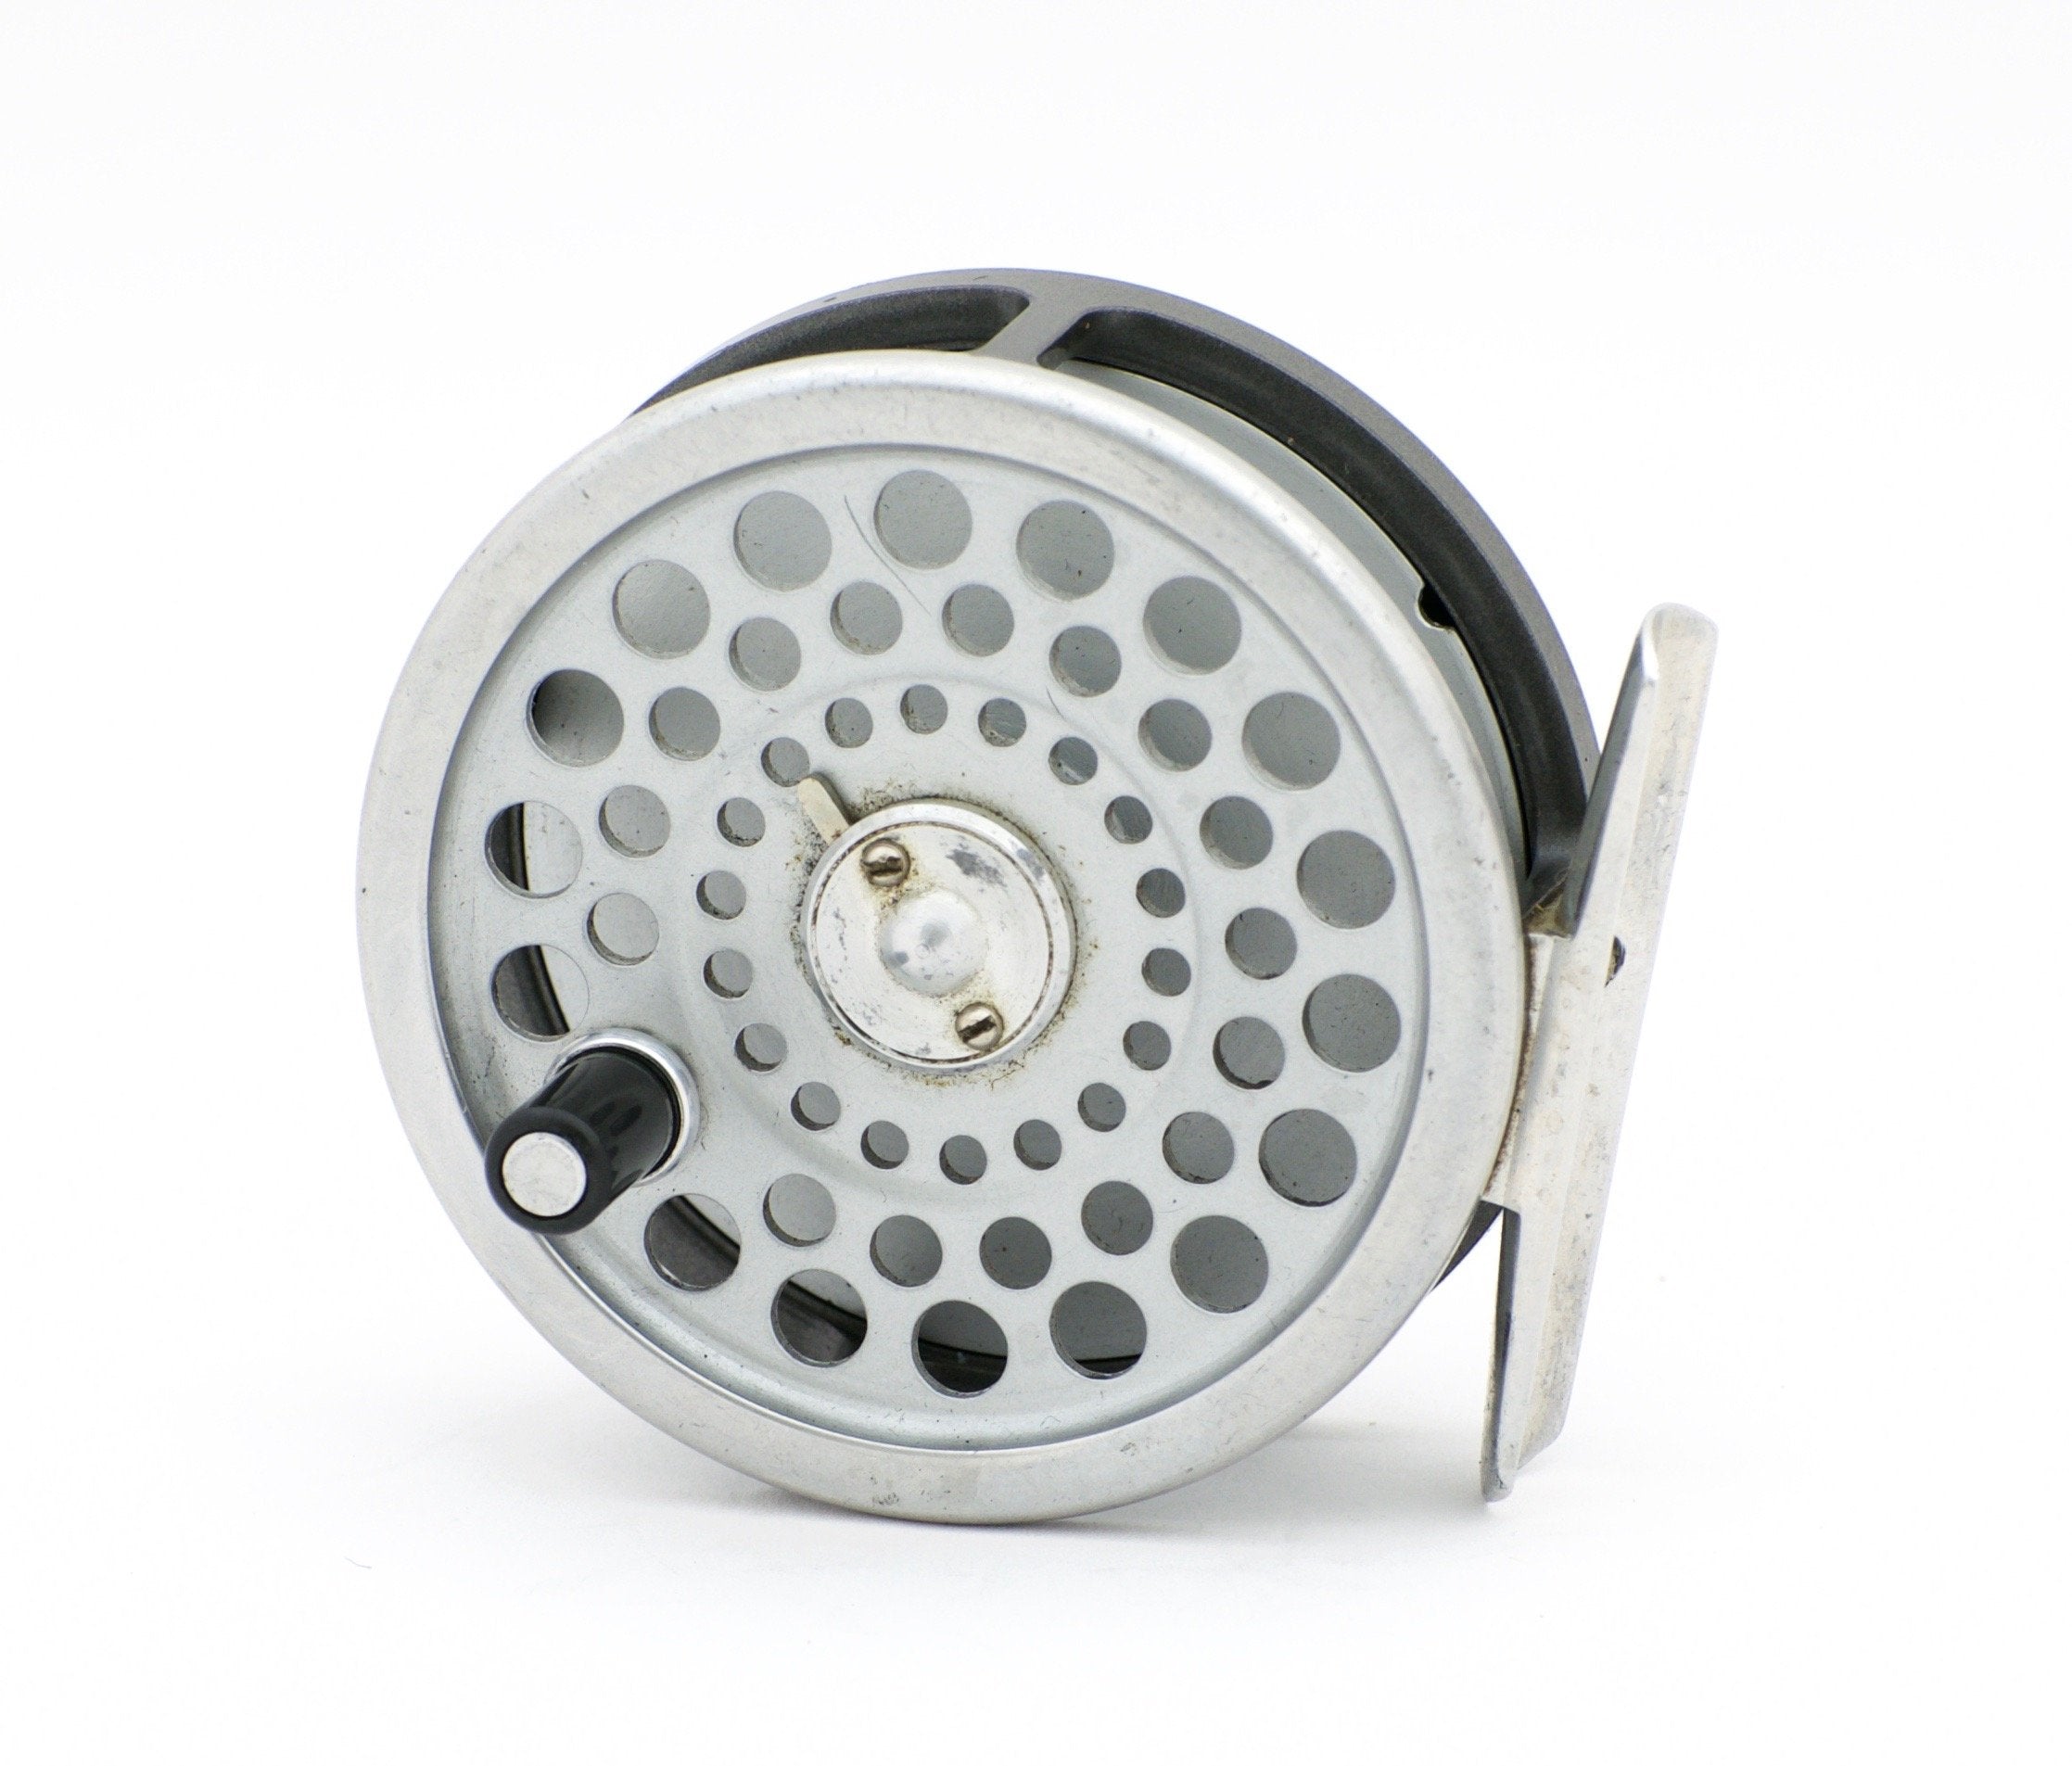 Hardy Sirrus #5/6 HE1020, 5 to 6wt fly line freshwater fly reel for trout